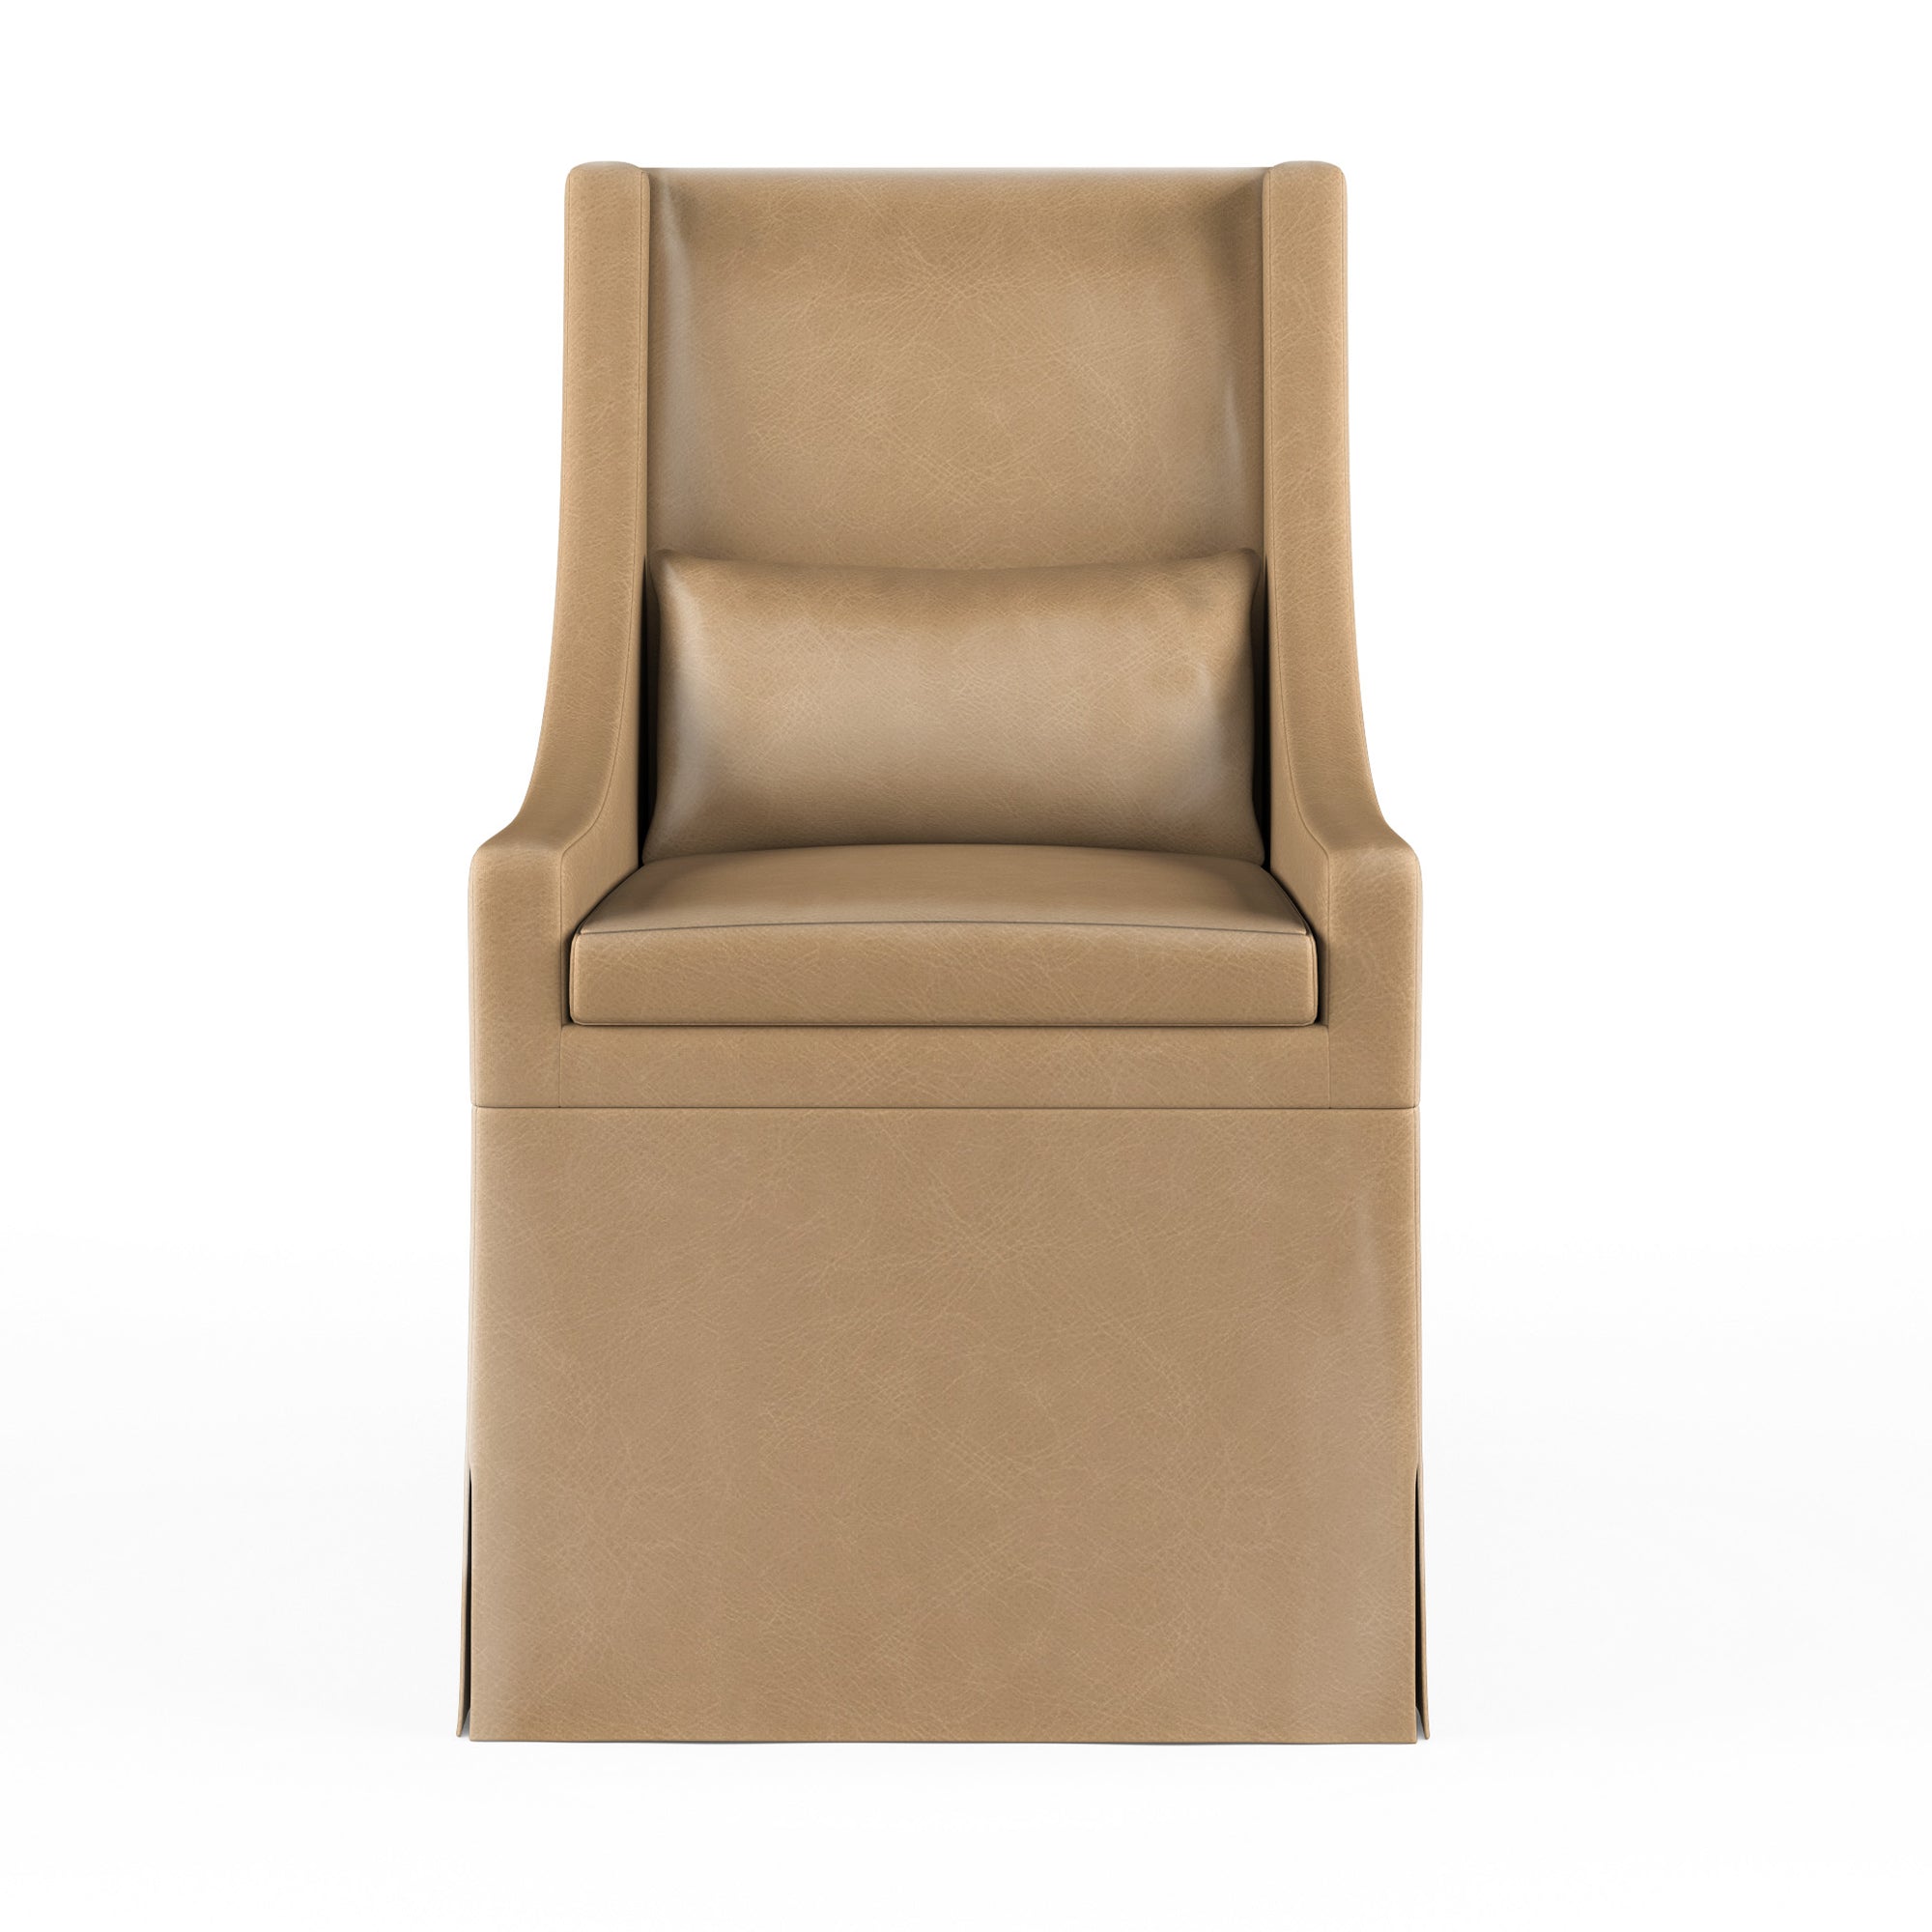 Serena Dining Chair - Marzipan Vintage Leather